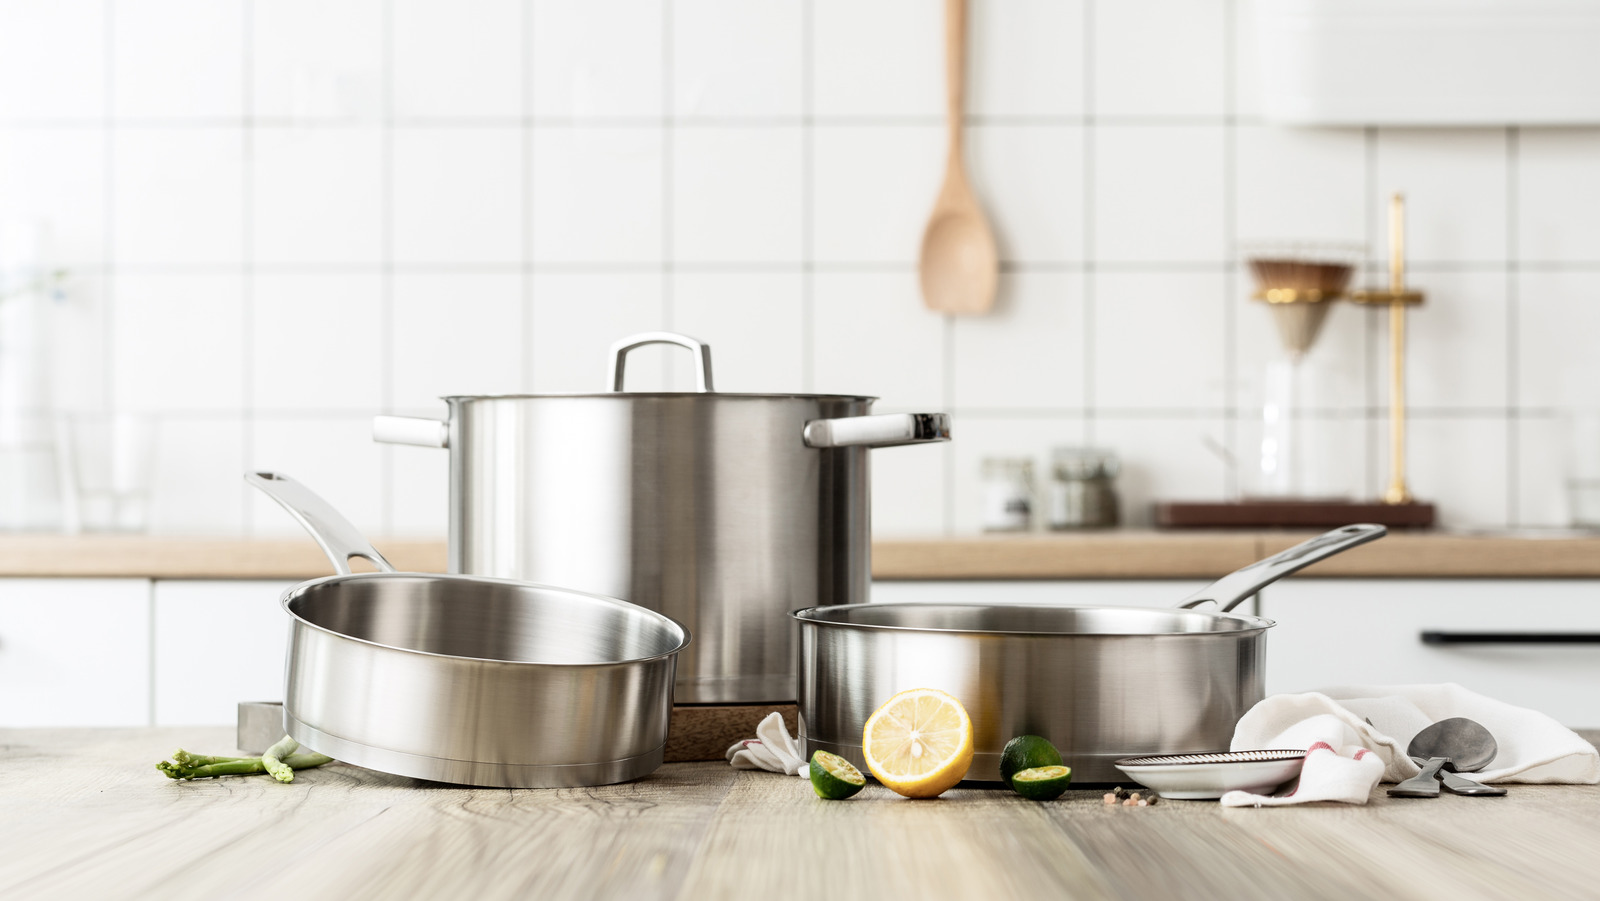 https://www.housedigest.com/img/gallery/stainless-steel-cookware-everything-you-need-to-know-before-you-buy/l-intro-1645042676.jpg